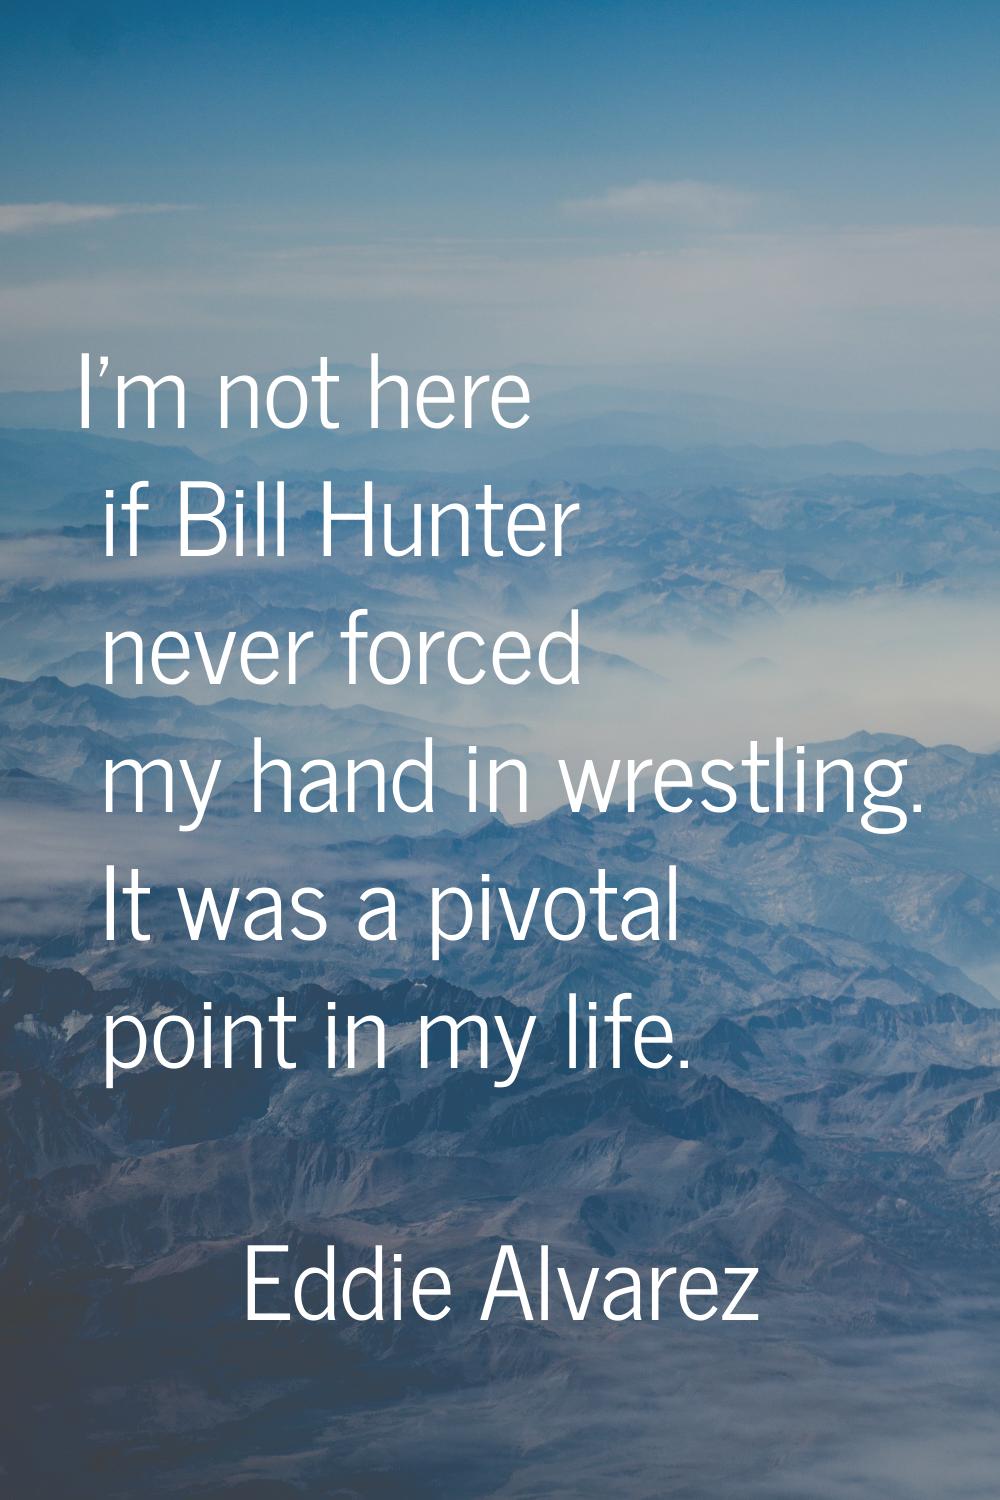 I'm not here if Bill Hunter never forced my hand in wrestling. It was a pivotal point in my life.